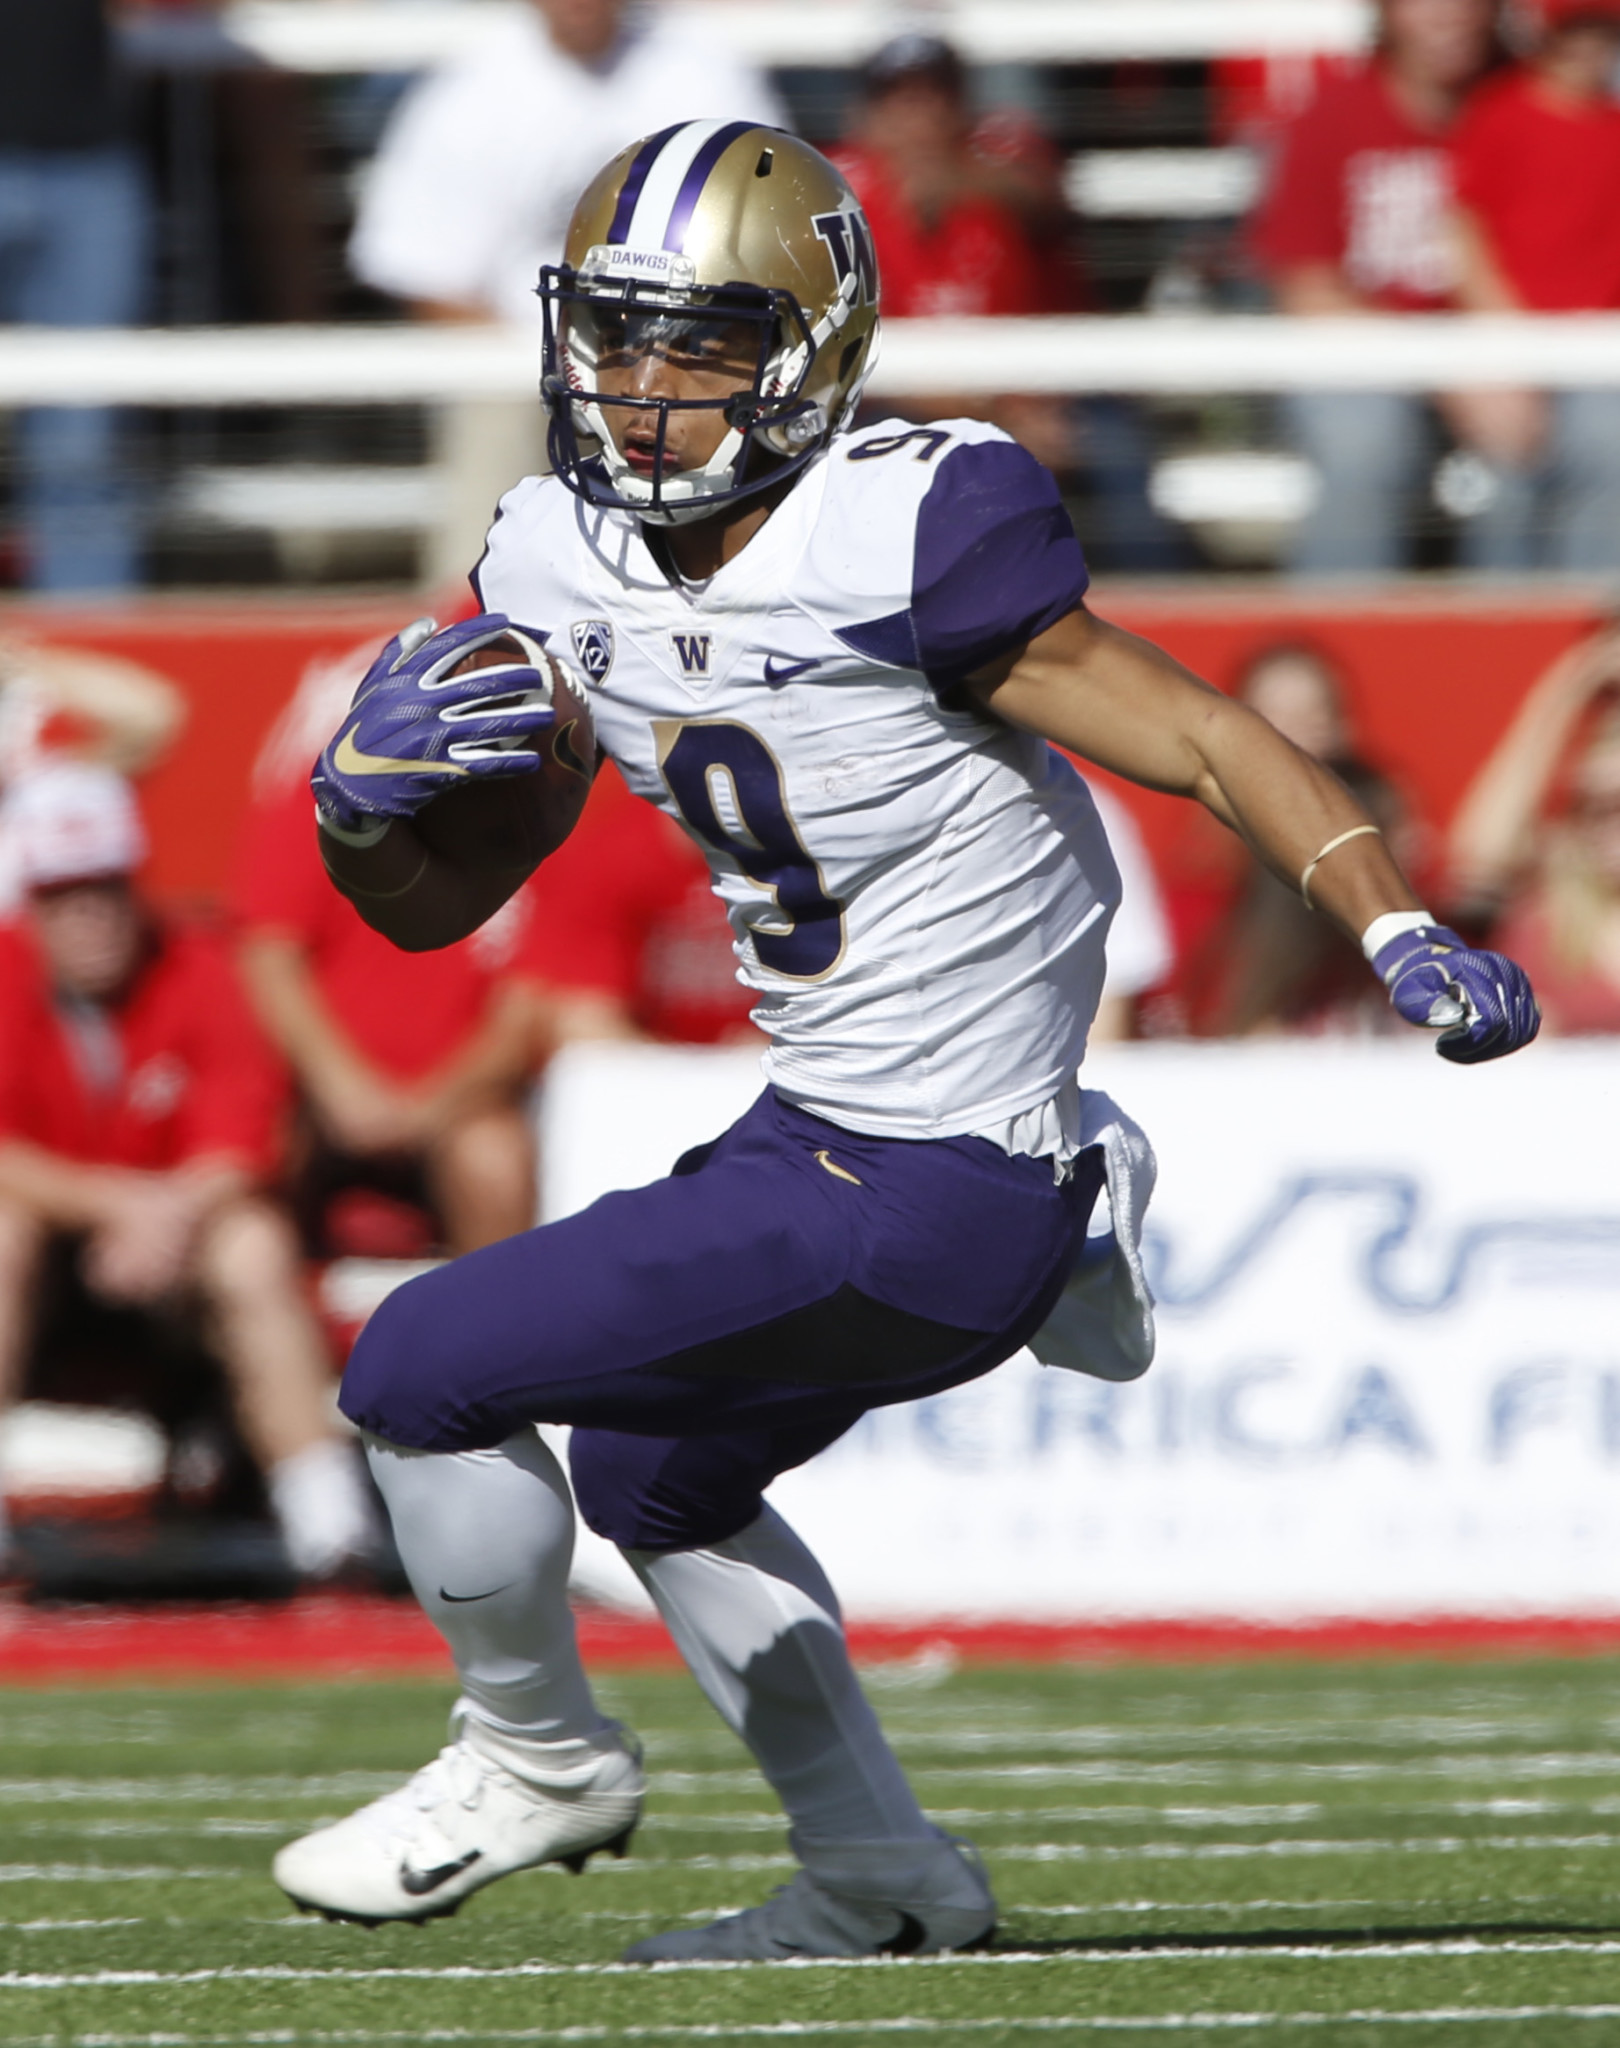 SALT LAKE CITY, UT - OCTOBER 29: Myles Gaskin #9 of the Washington Huskies runs the ball against the Utah Utes at an NCAA football game at Rice-Eccles Stadium on October 29, 2016 in Salt Lake City, Utah. (Photo by George Frey/Getty Images) Local Caption ***Myles Gaskin